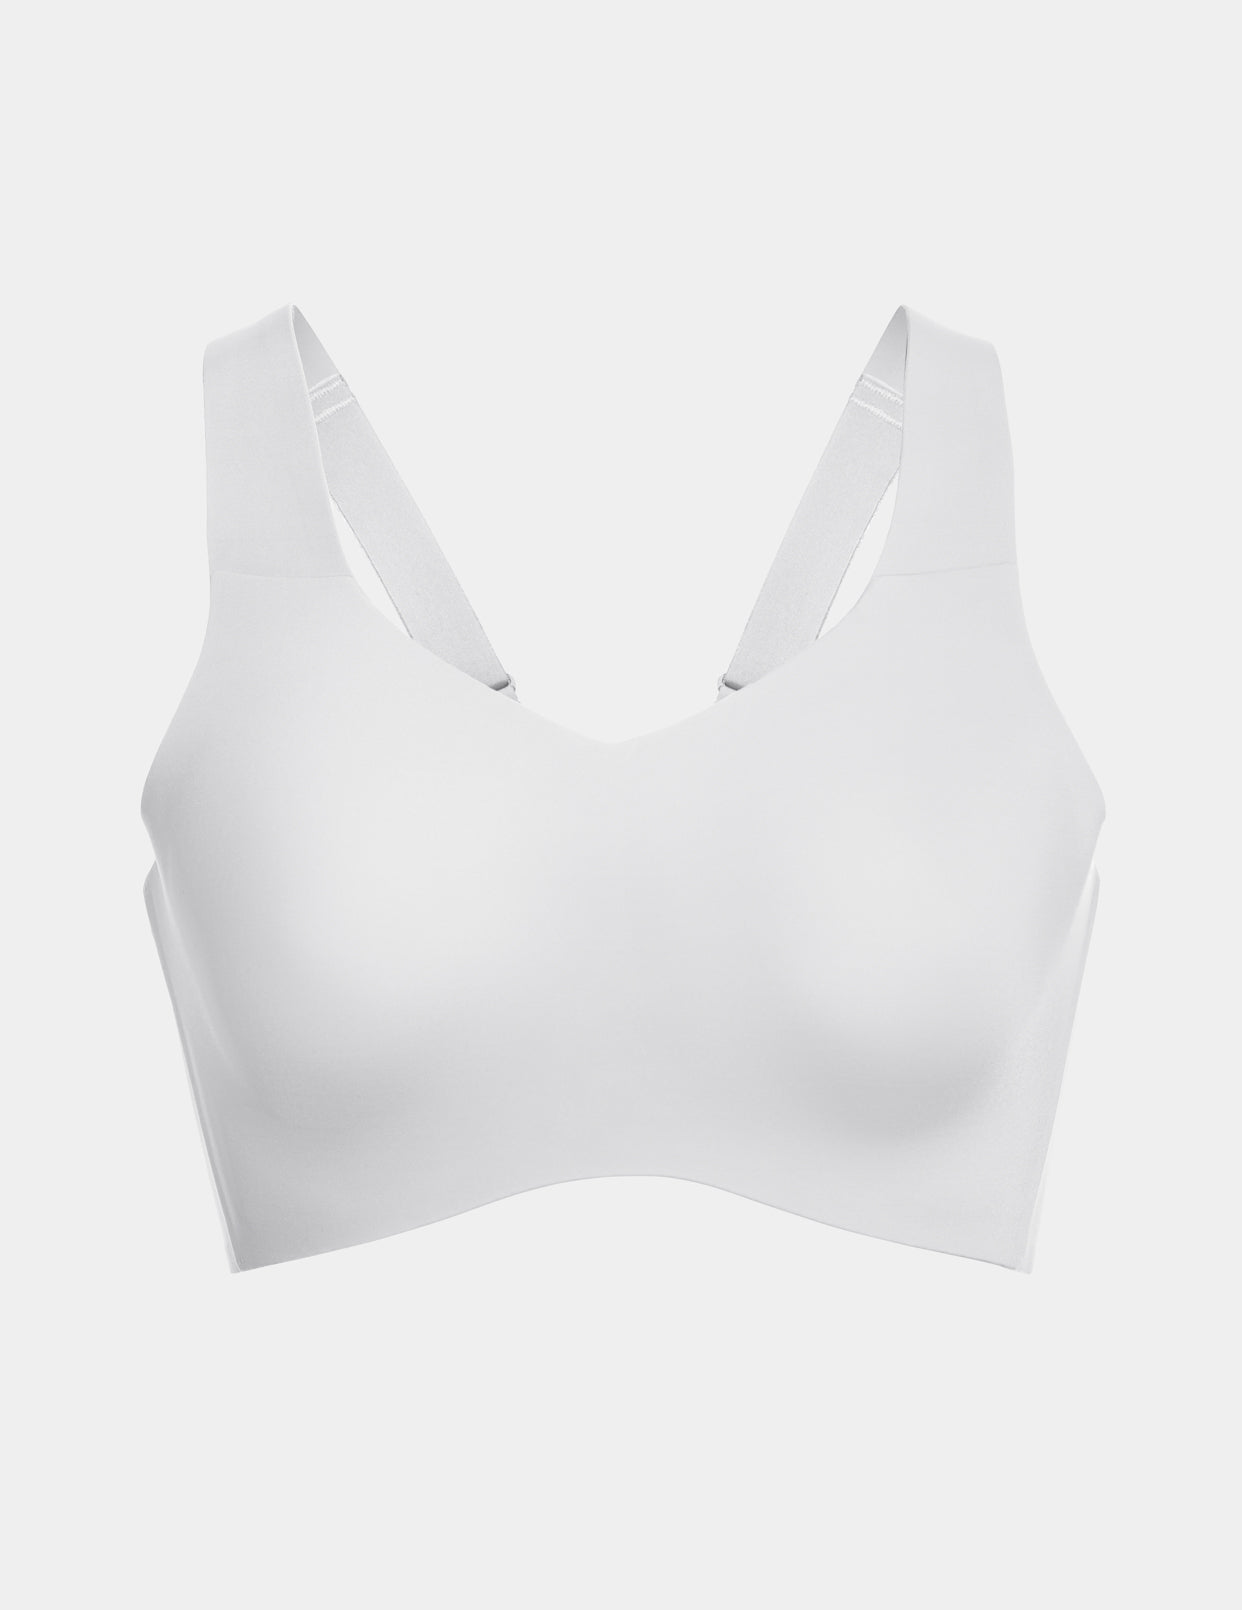 Shockproof Crisscross Backless Sports Bra For Women Push Up Fitness Knix  Underwear Bras For Gym, Yoga, And Workouts U 168 From Cjx3995841, $15.92